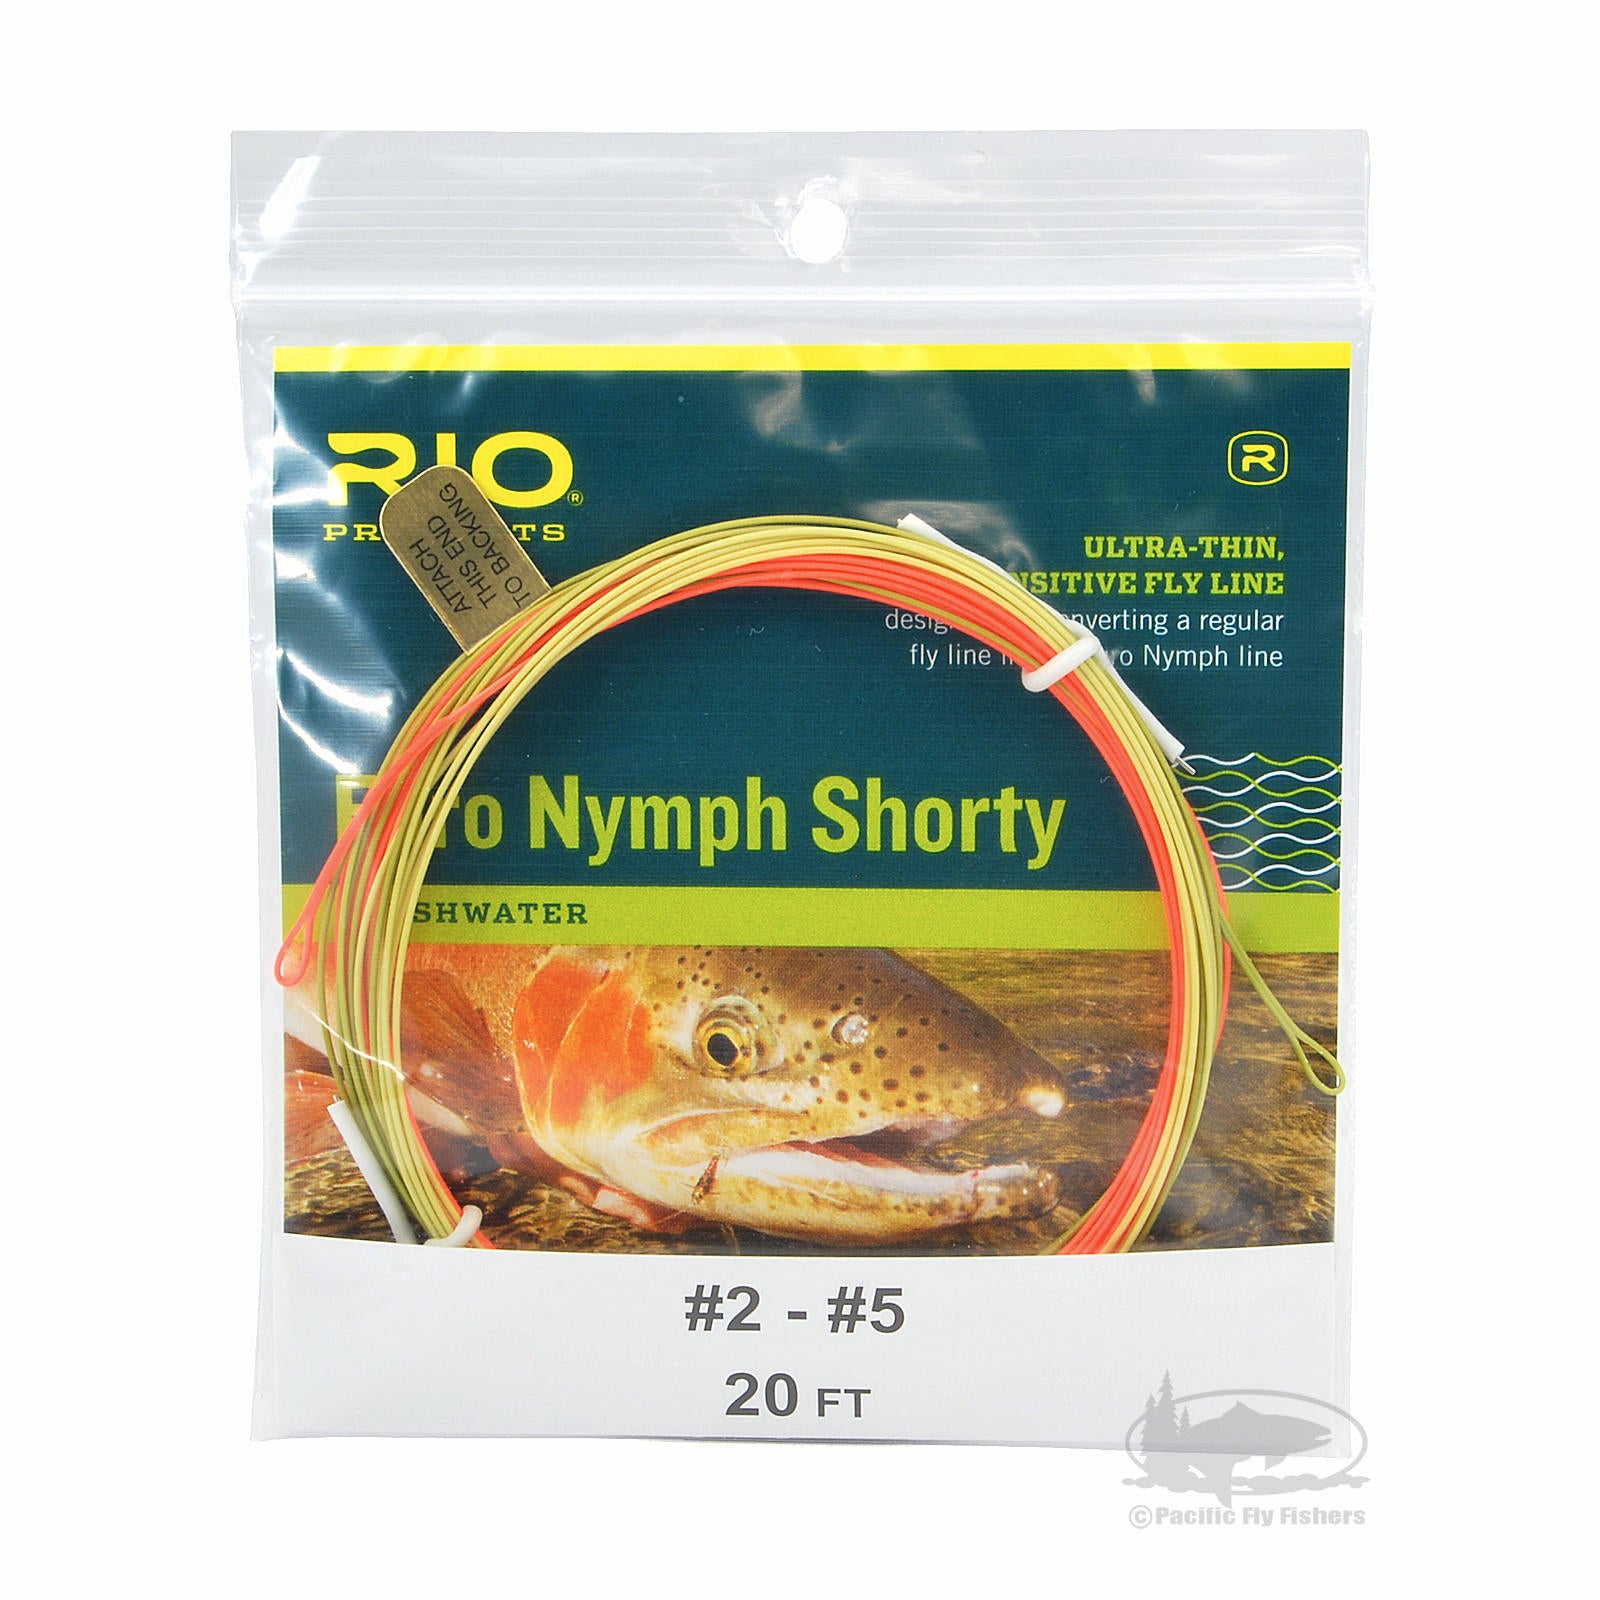 Spotlight on RIO's Technical Euro Nymph Fly Line 